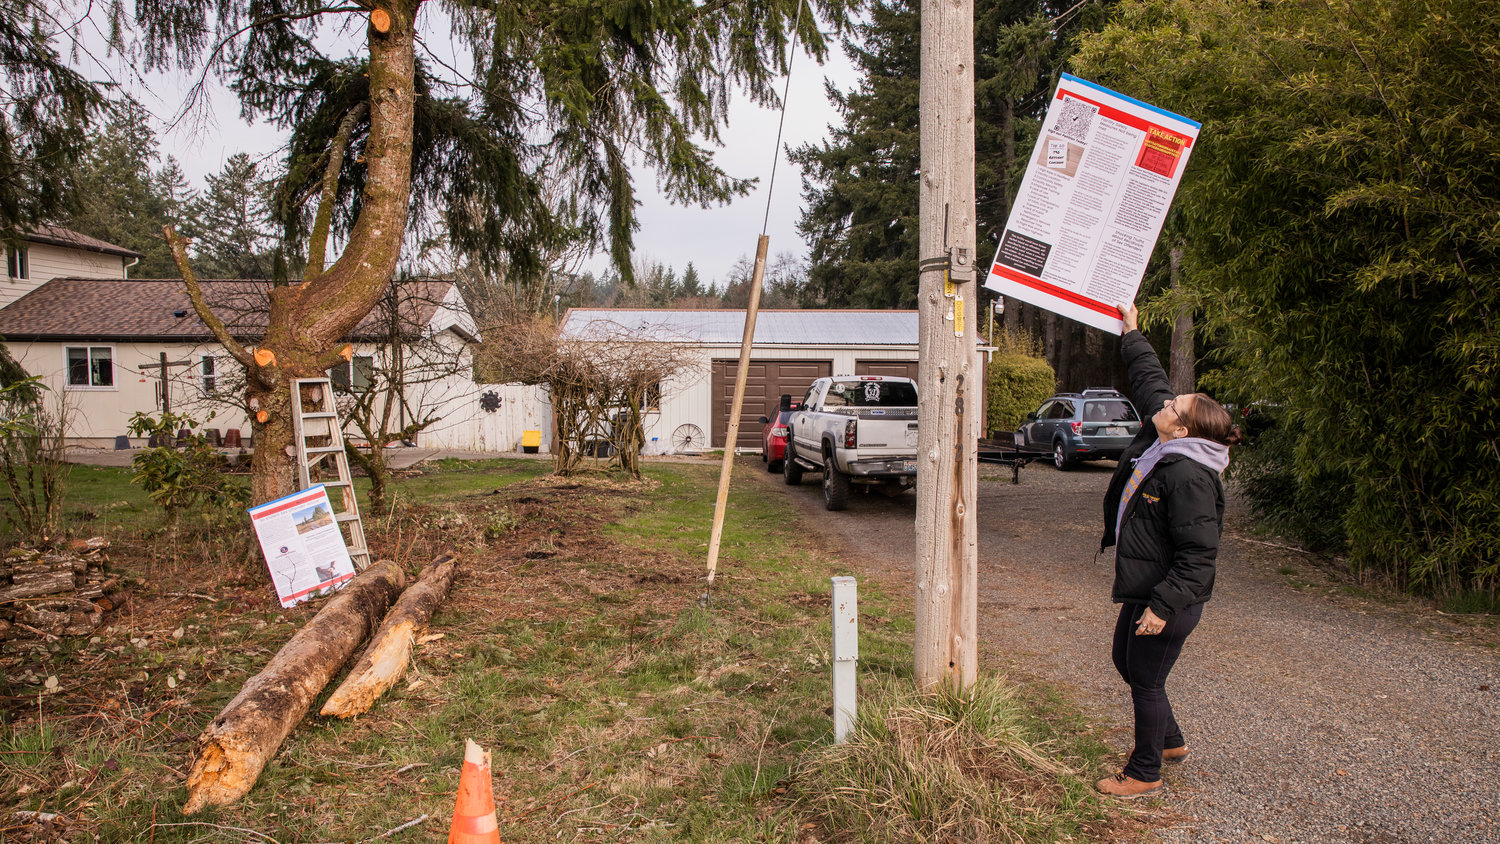 Kim Crist, who lives across the street from the Supreme Living facility, looks to put up signage above a live trail camera facing out from her property Wednesday morning.